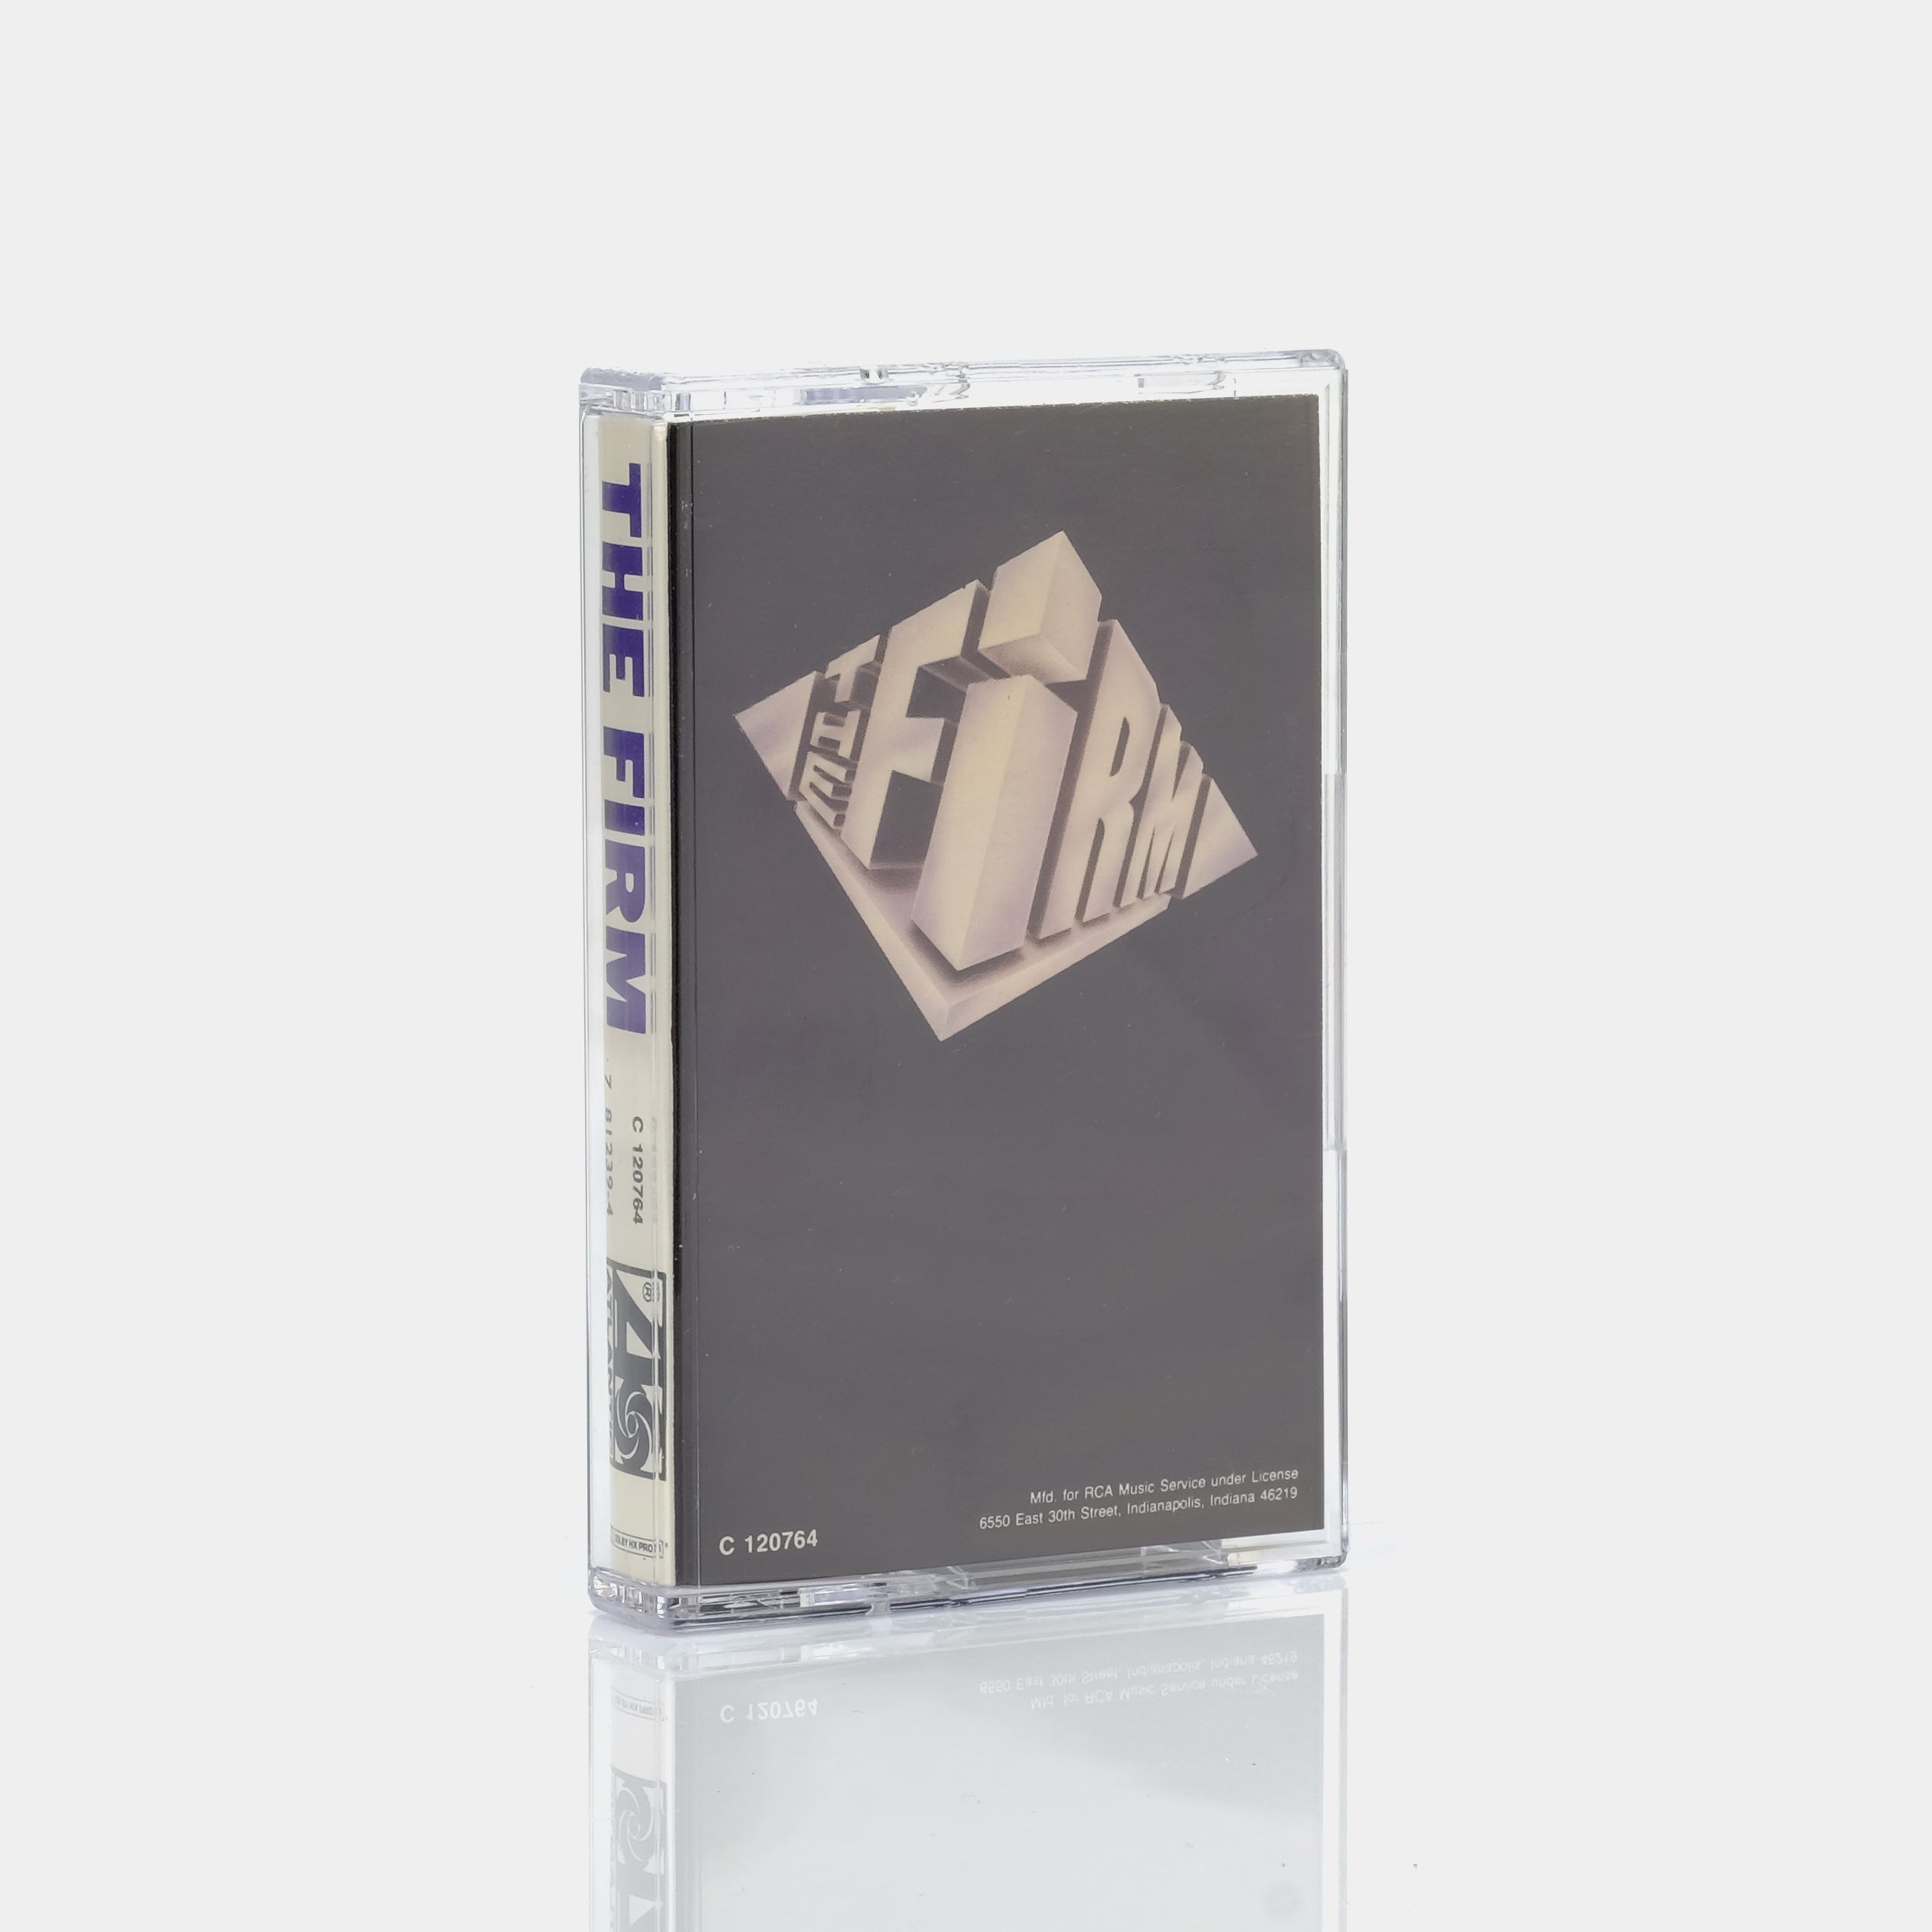 The Firm - The Firm Cassette Tape